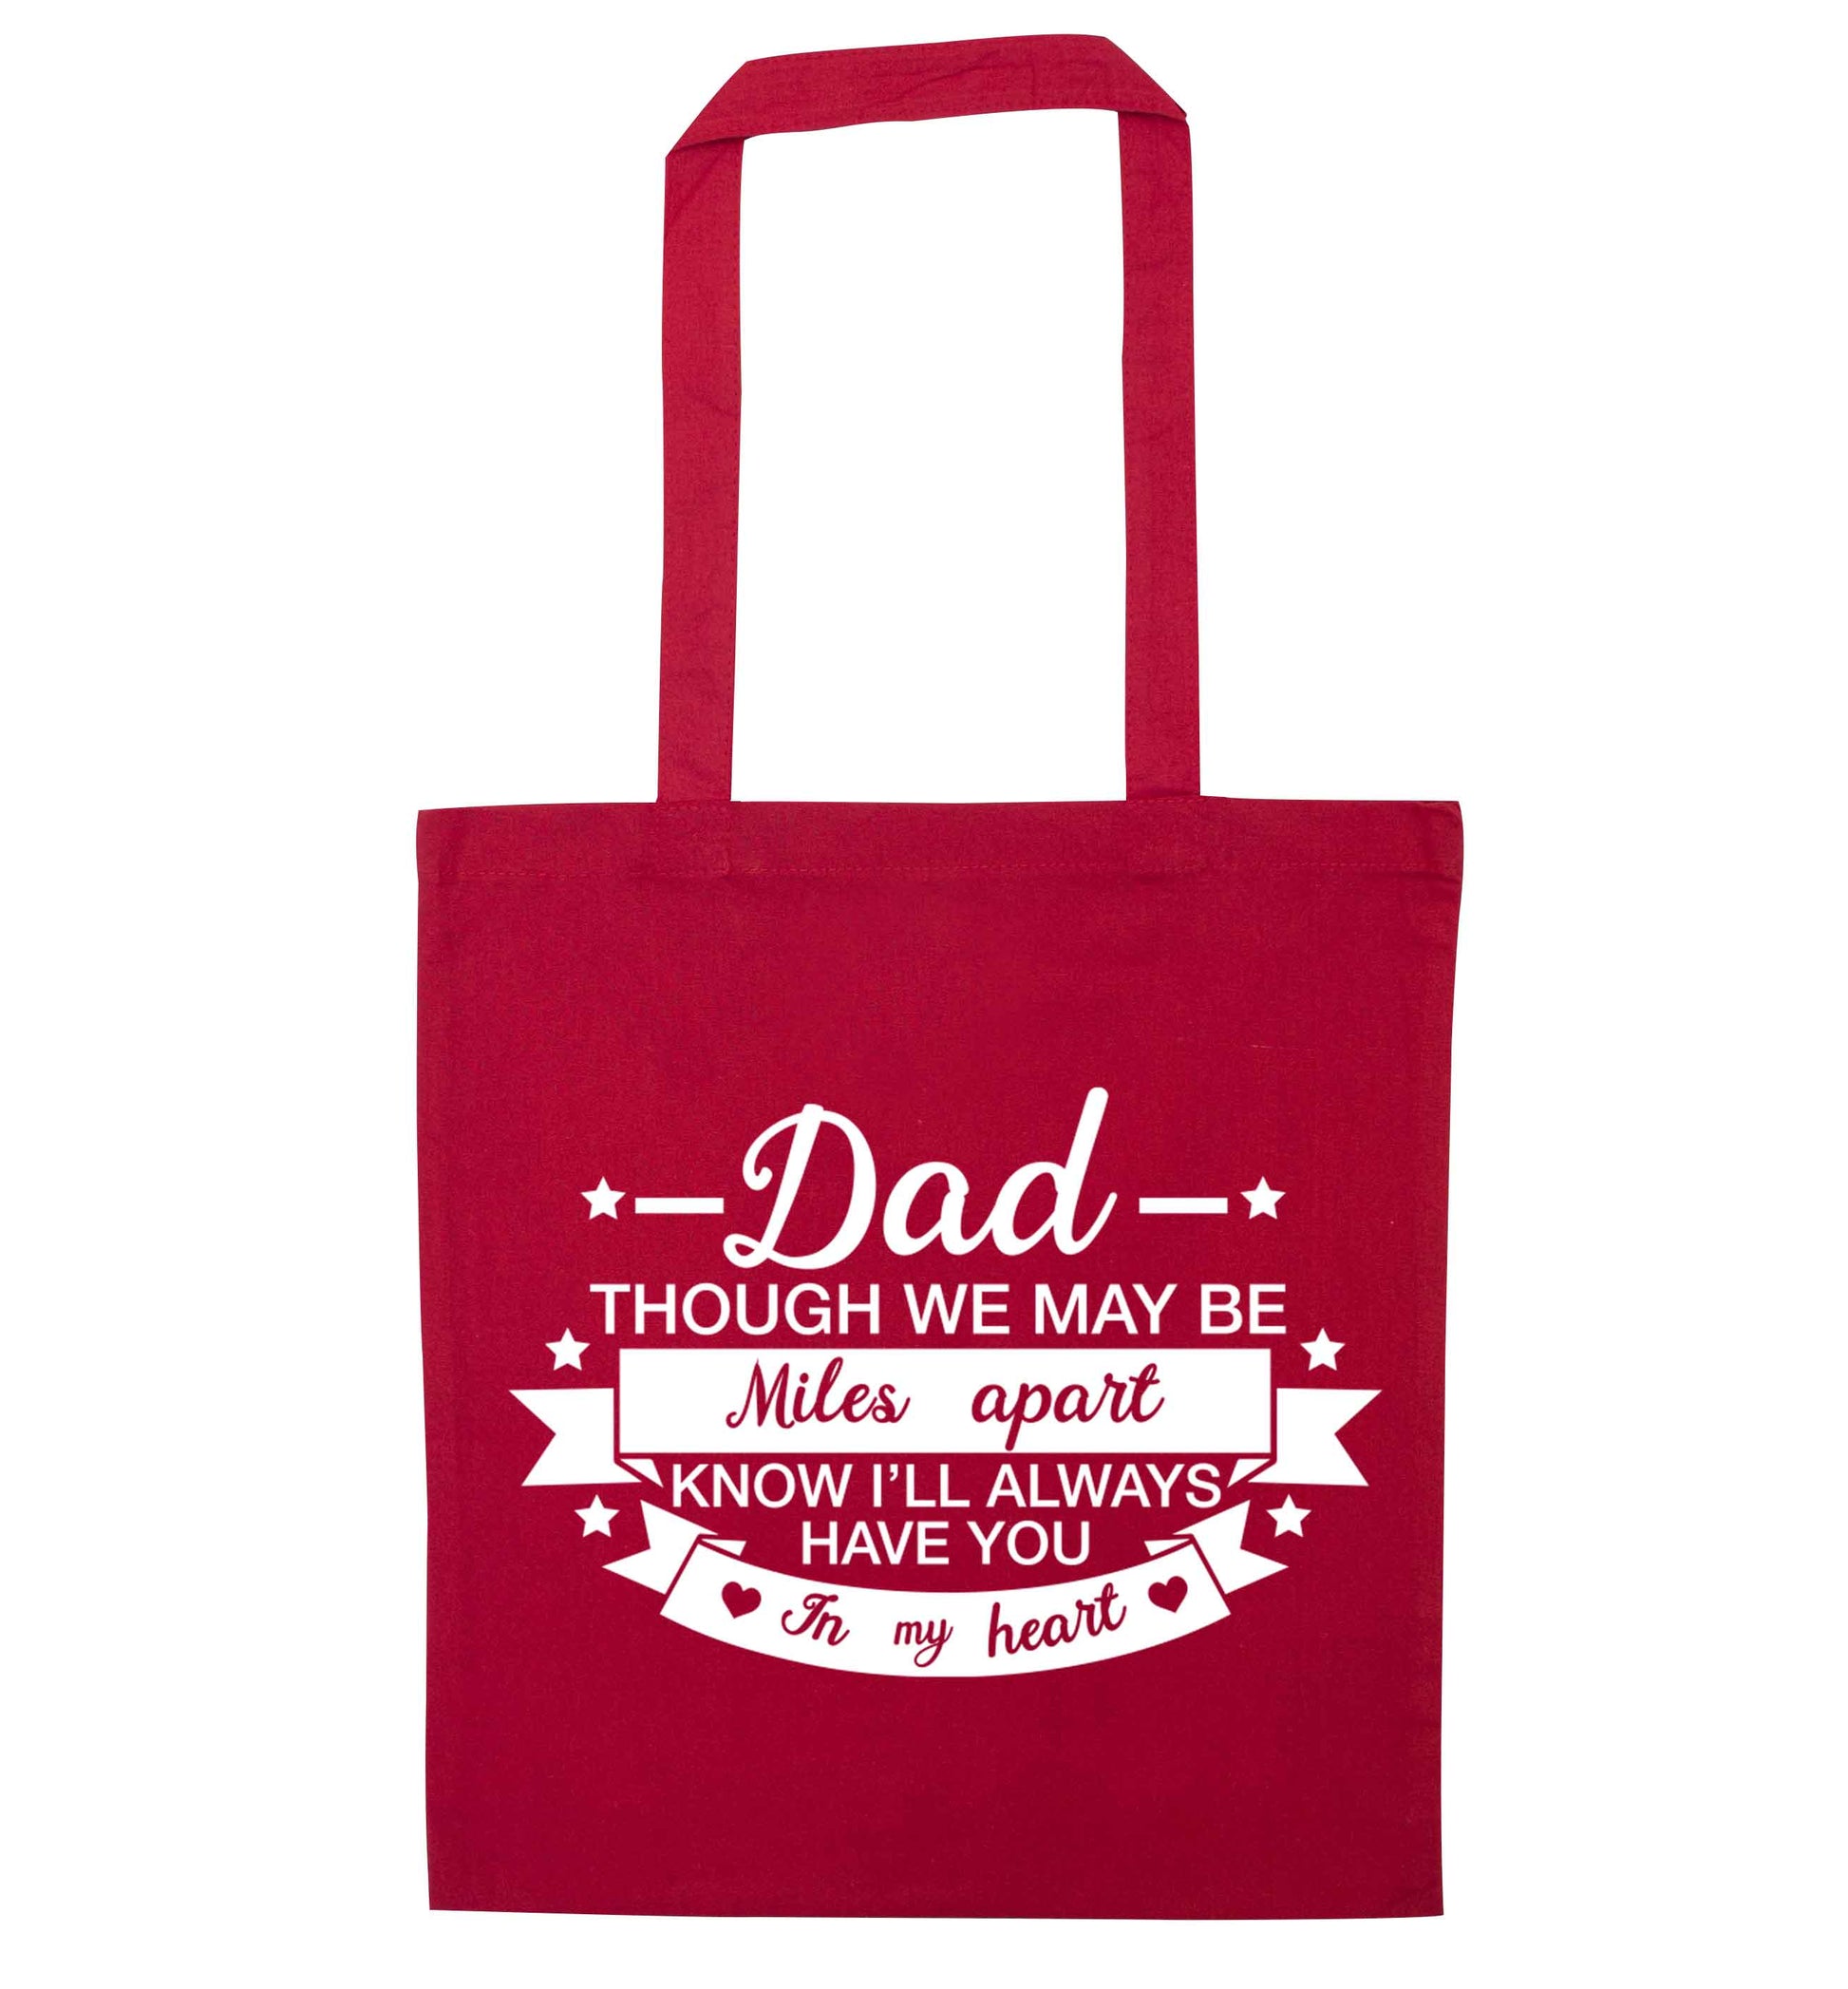 Dad though we are miles apart know I'll always have you in my heart red tote bag